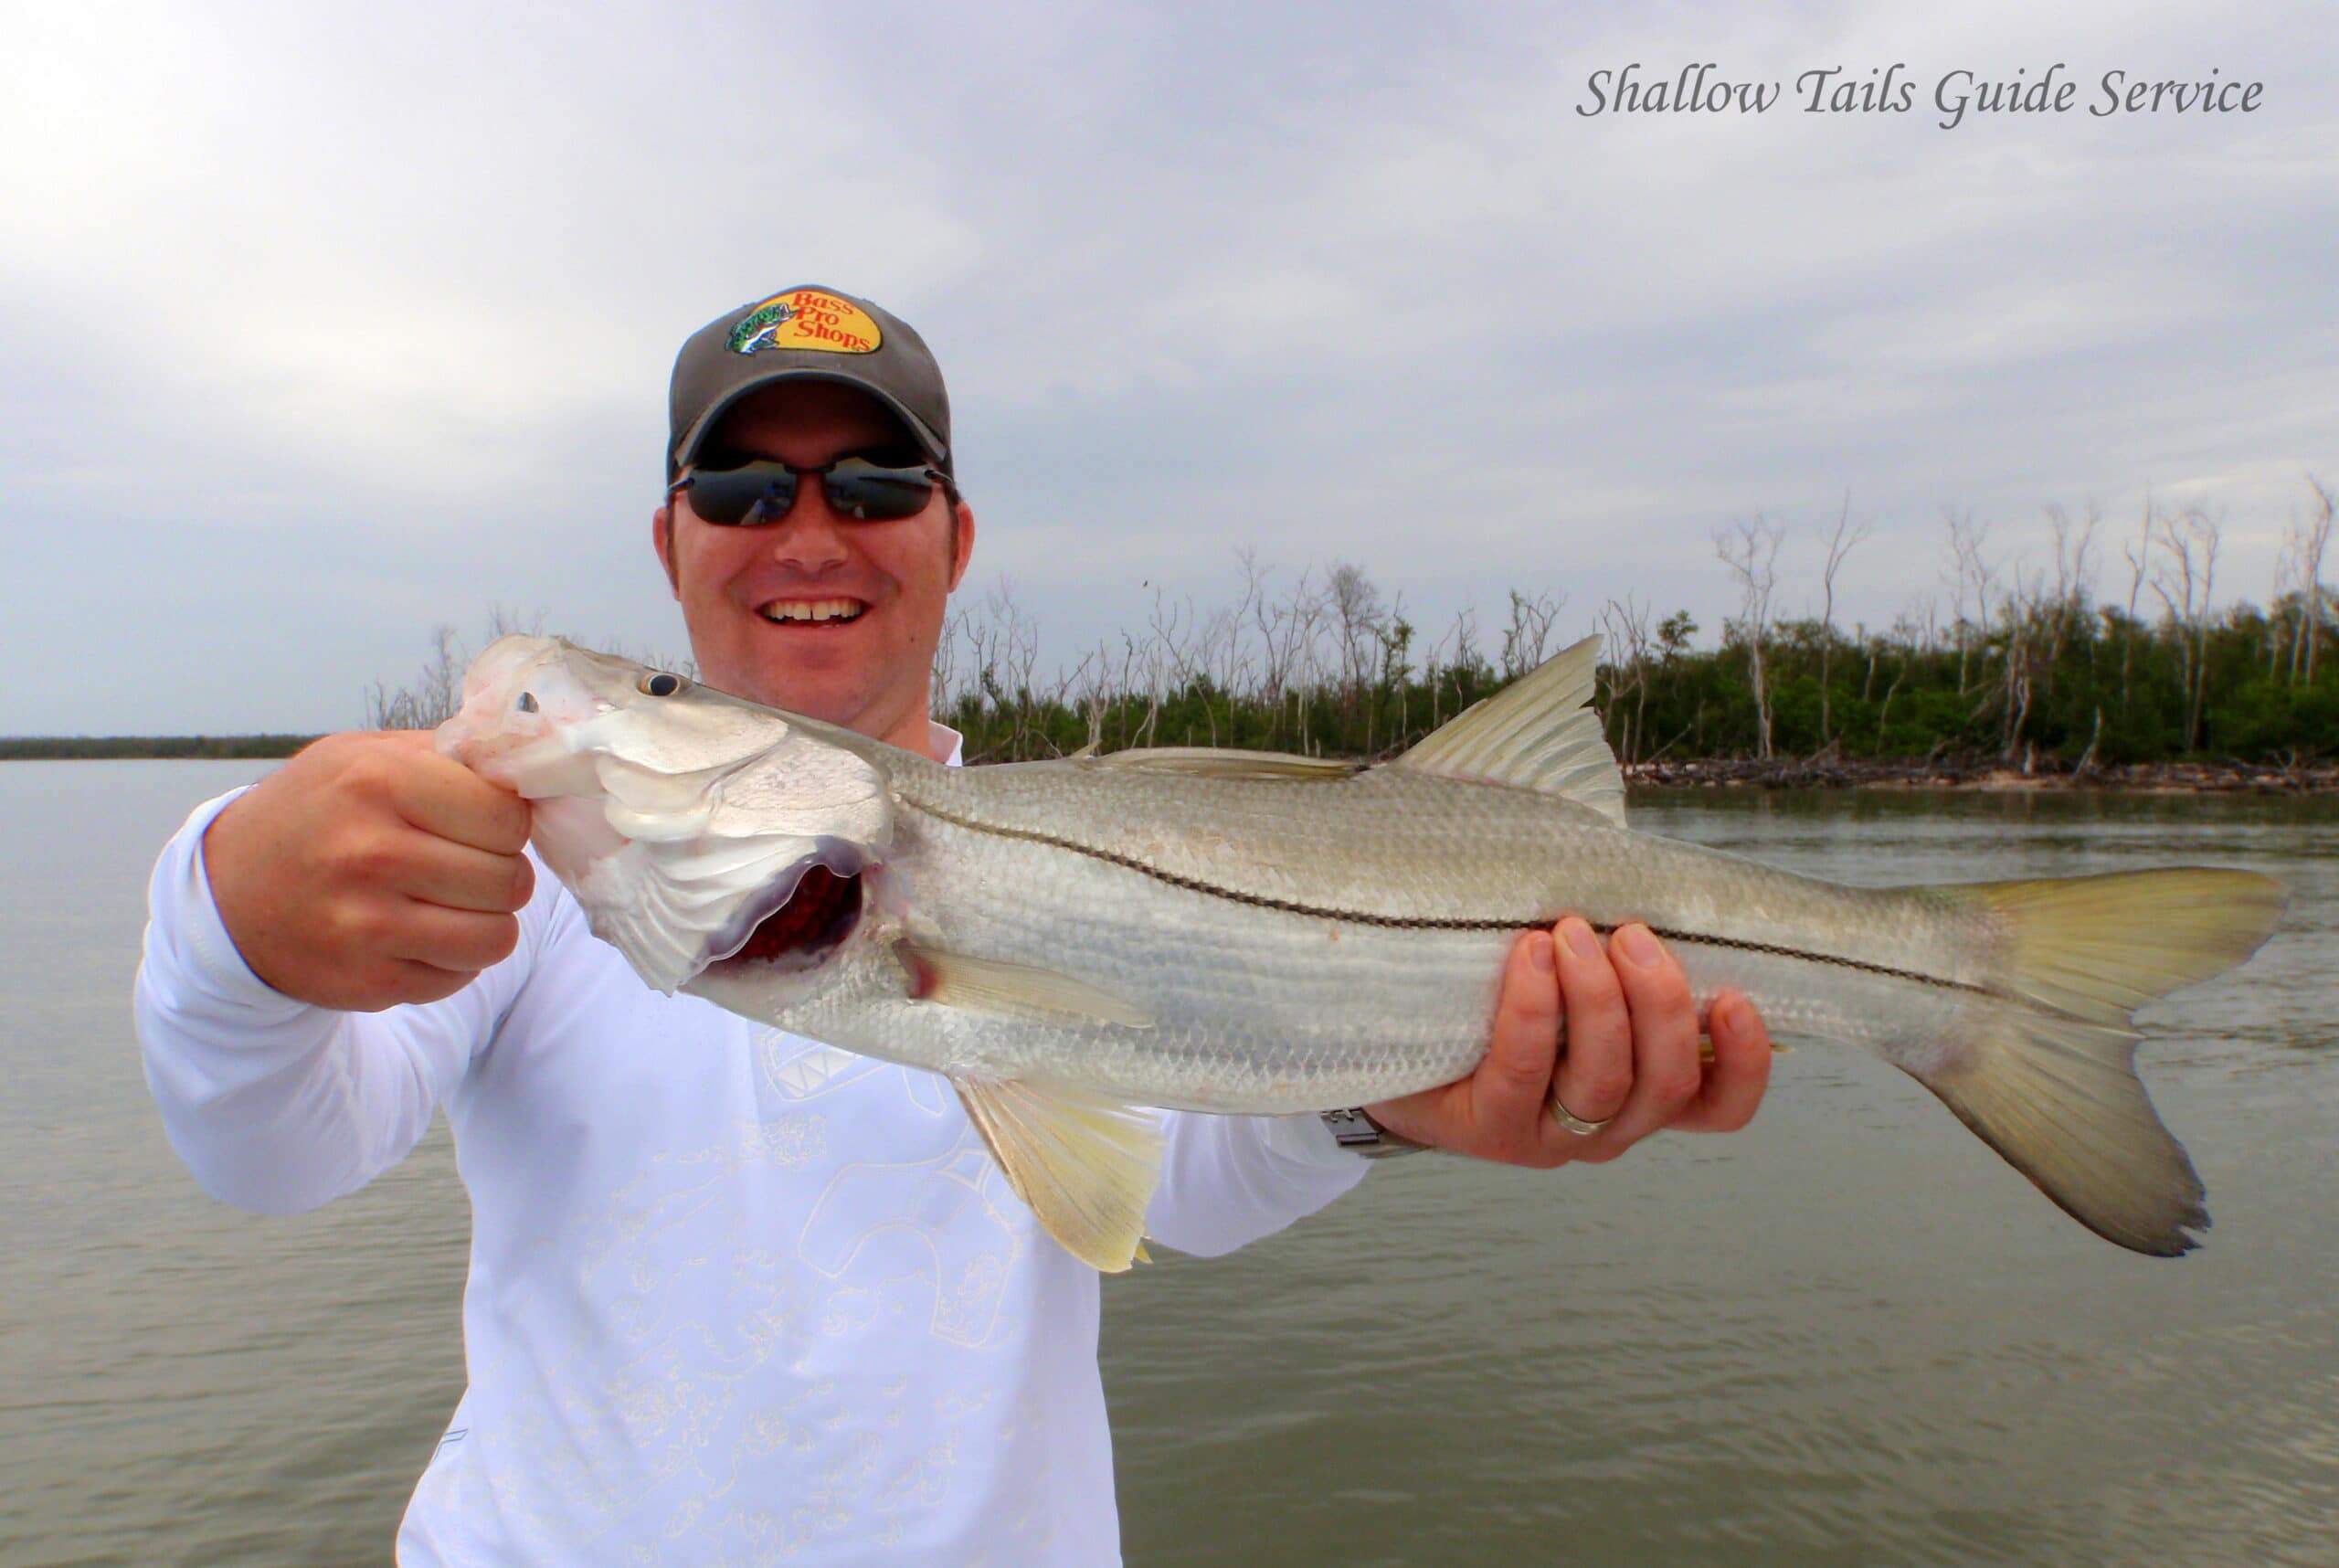 Flamingo Everglades Florida Fishing Guide Report|Snook Fishing Is Red Hot!